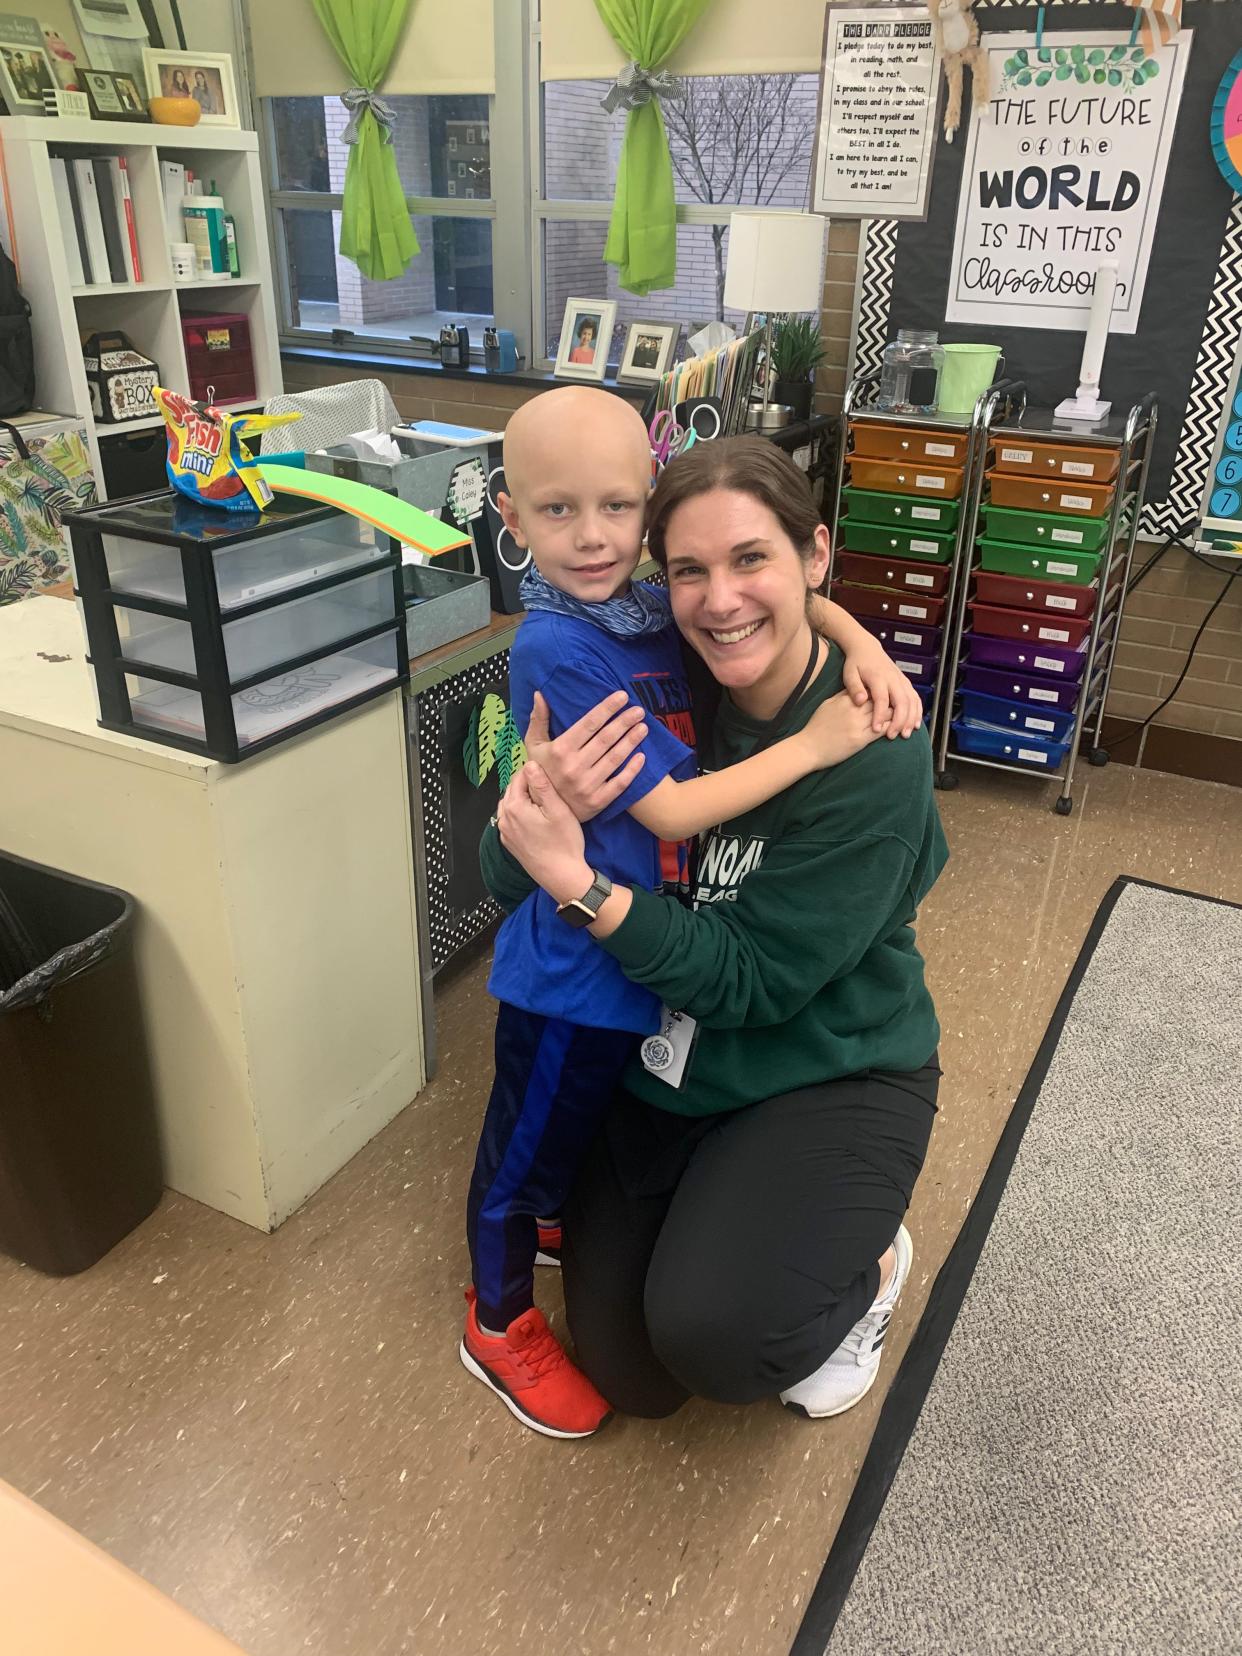 Blake Michel, who is undergoing treatment for cancer, hugs Plain Local Schools teacher Alexandra Cale who has supported her student through the process.